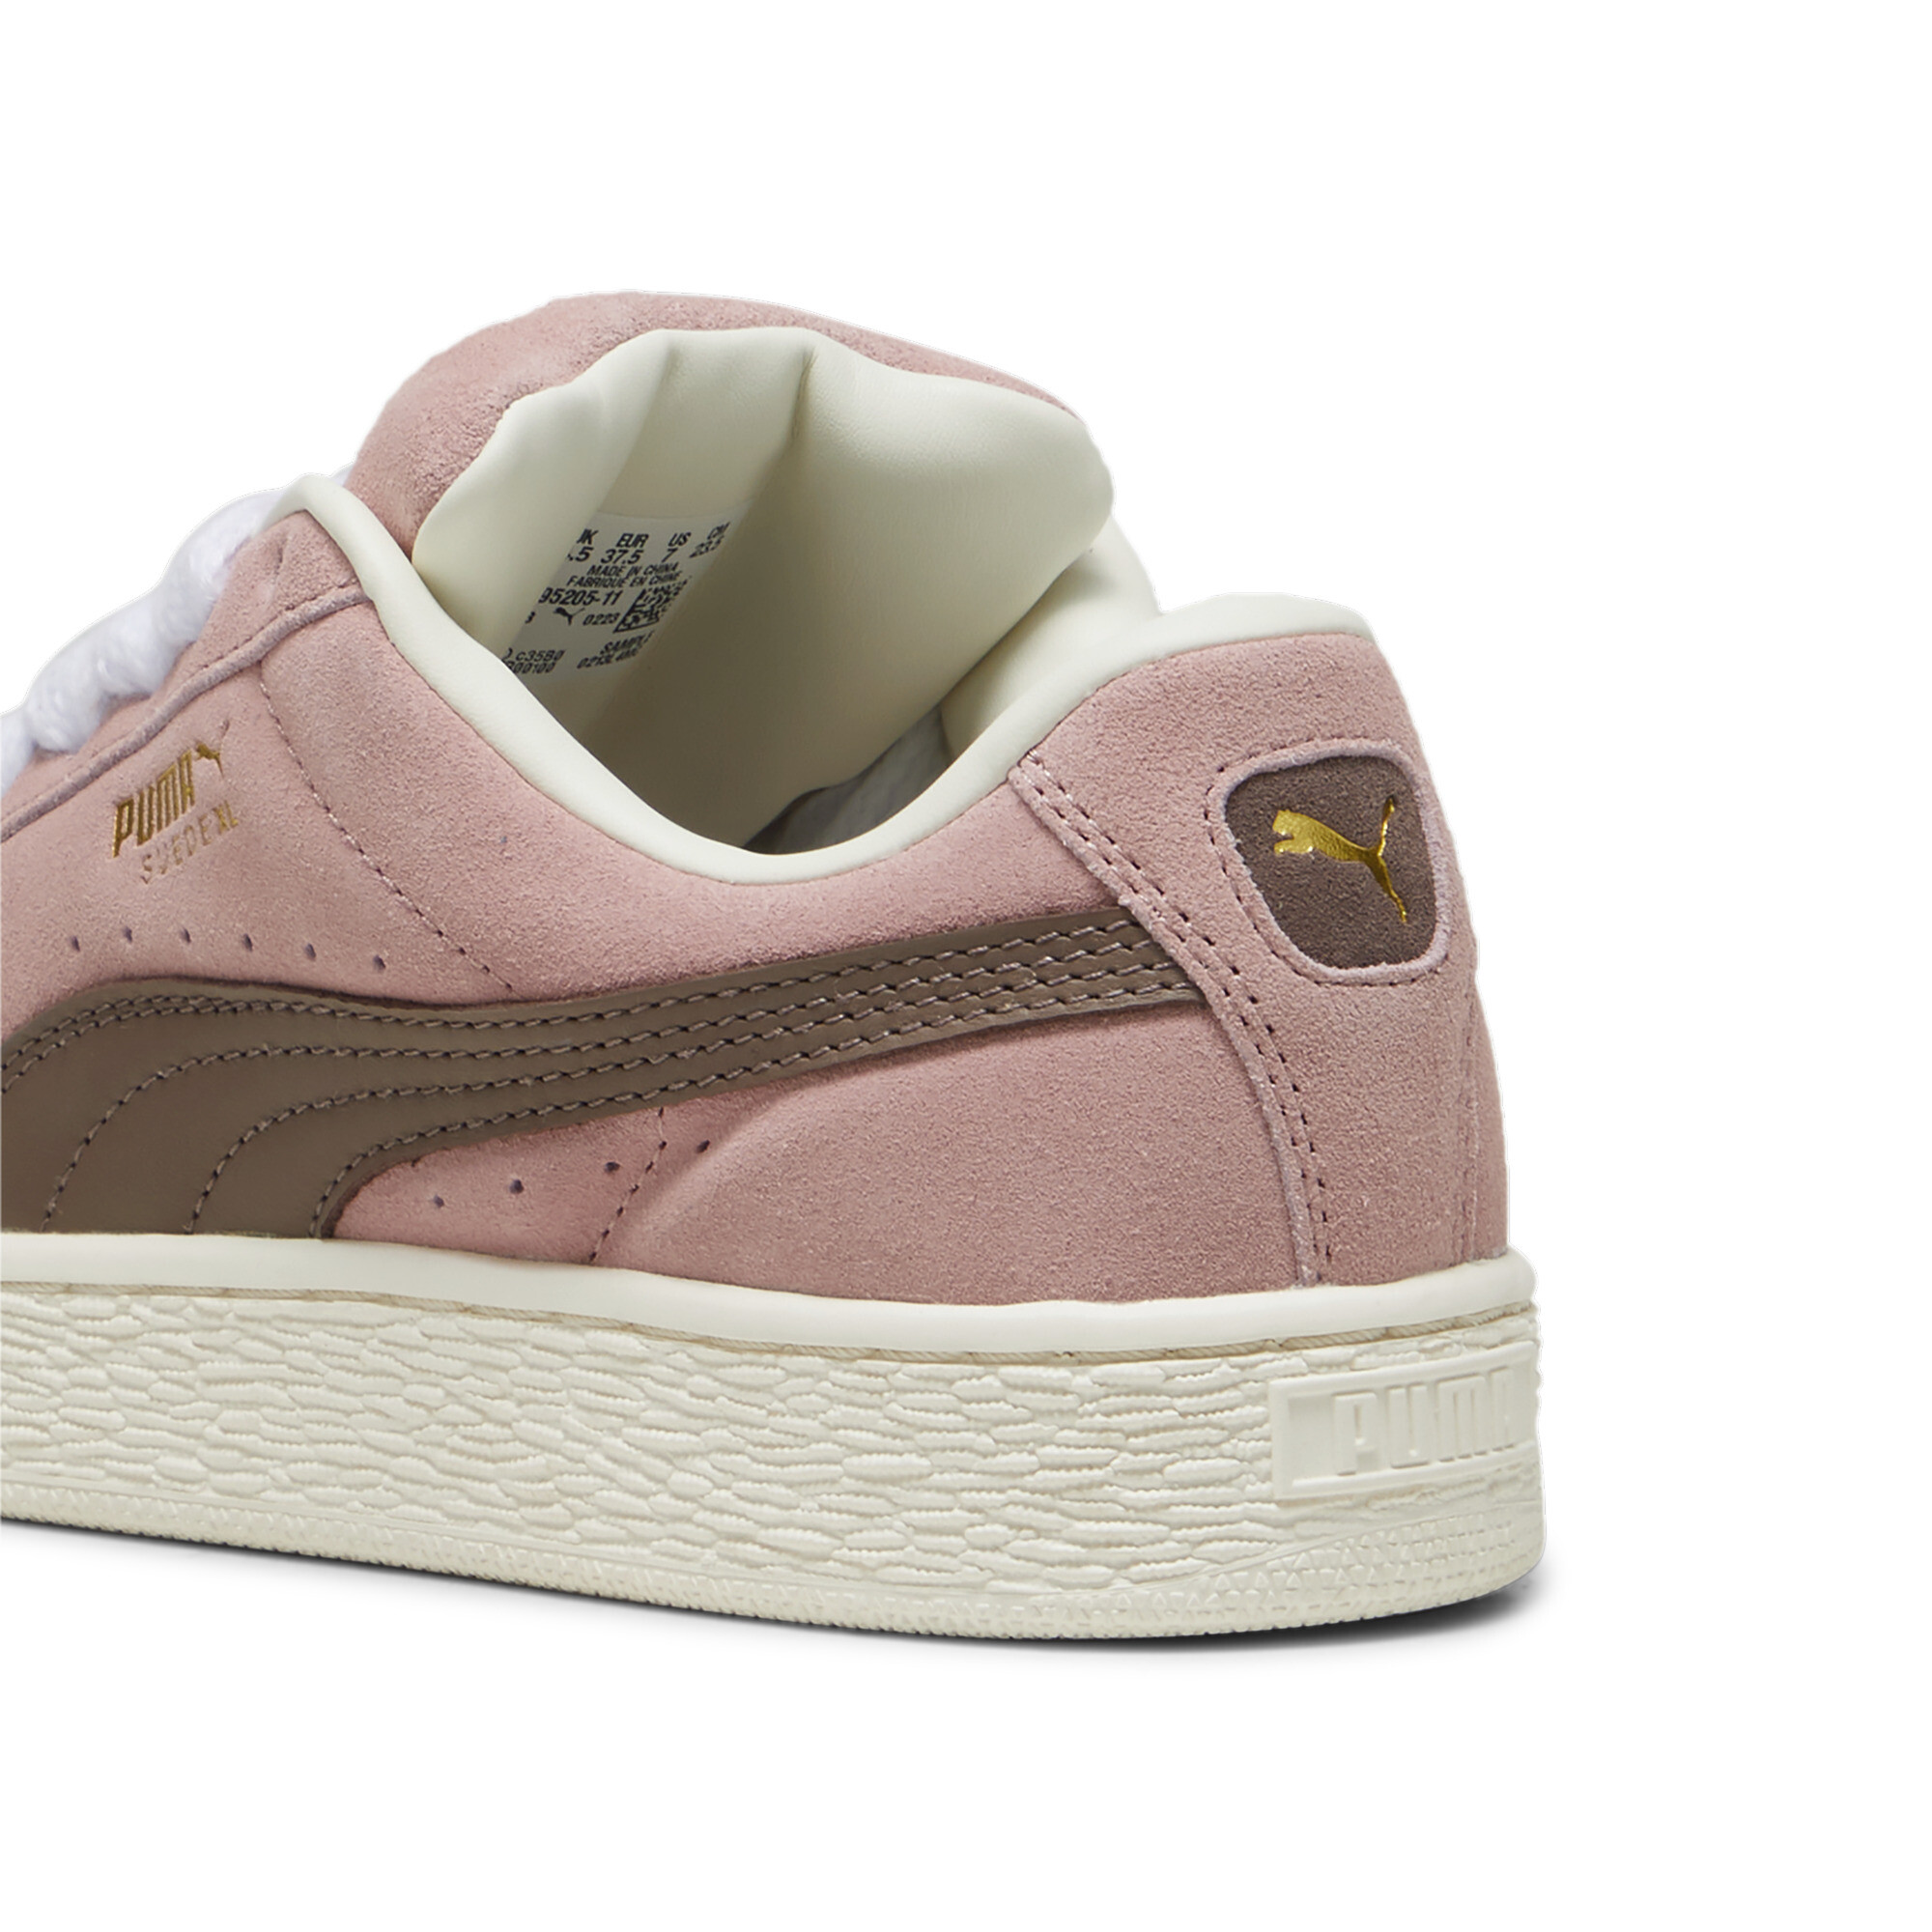 Puma Suede XL Sneakers Unisex, Pink, Size 37.5, Shoes